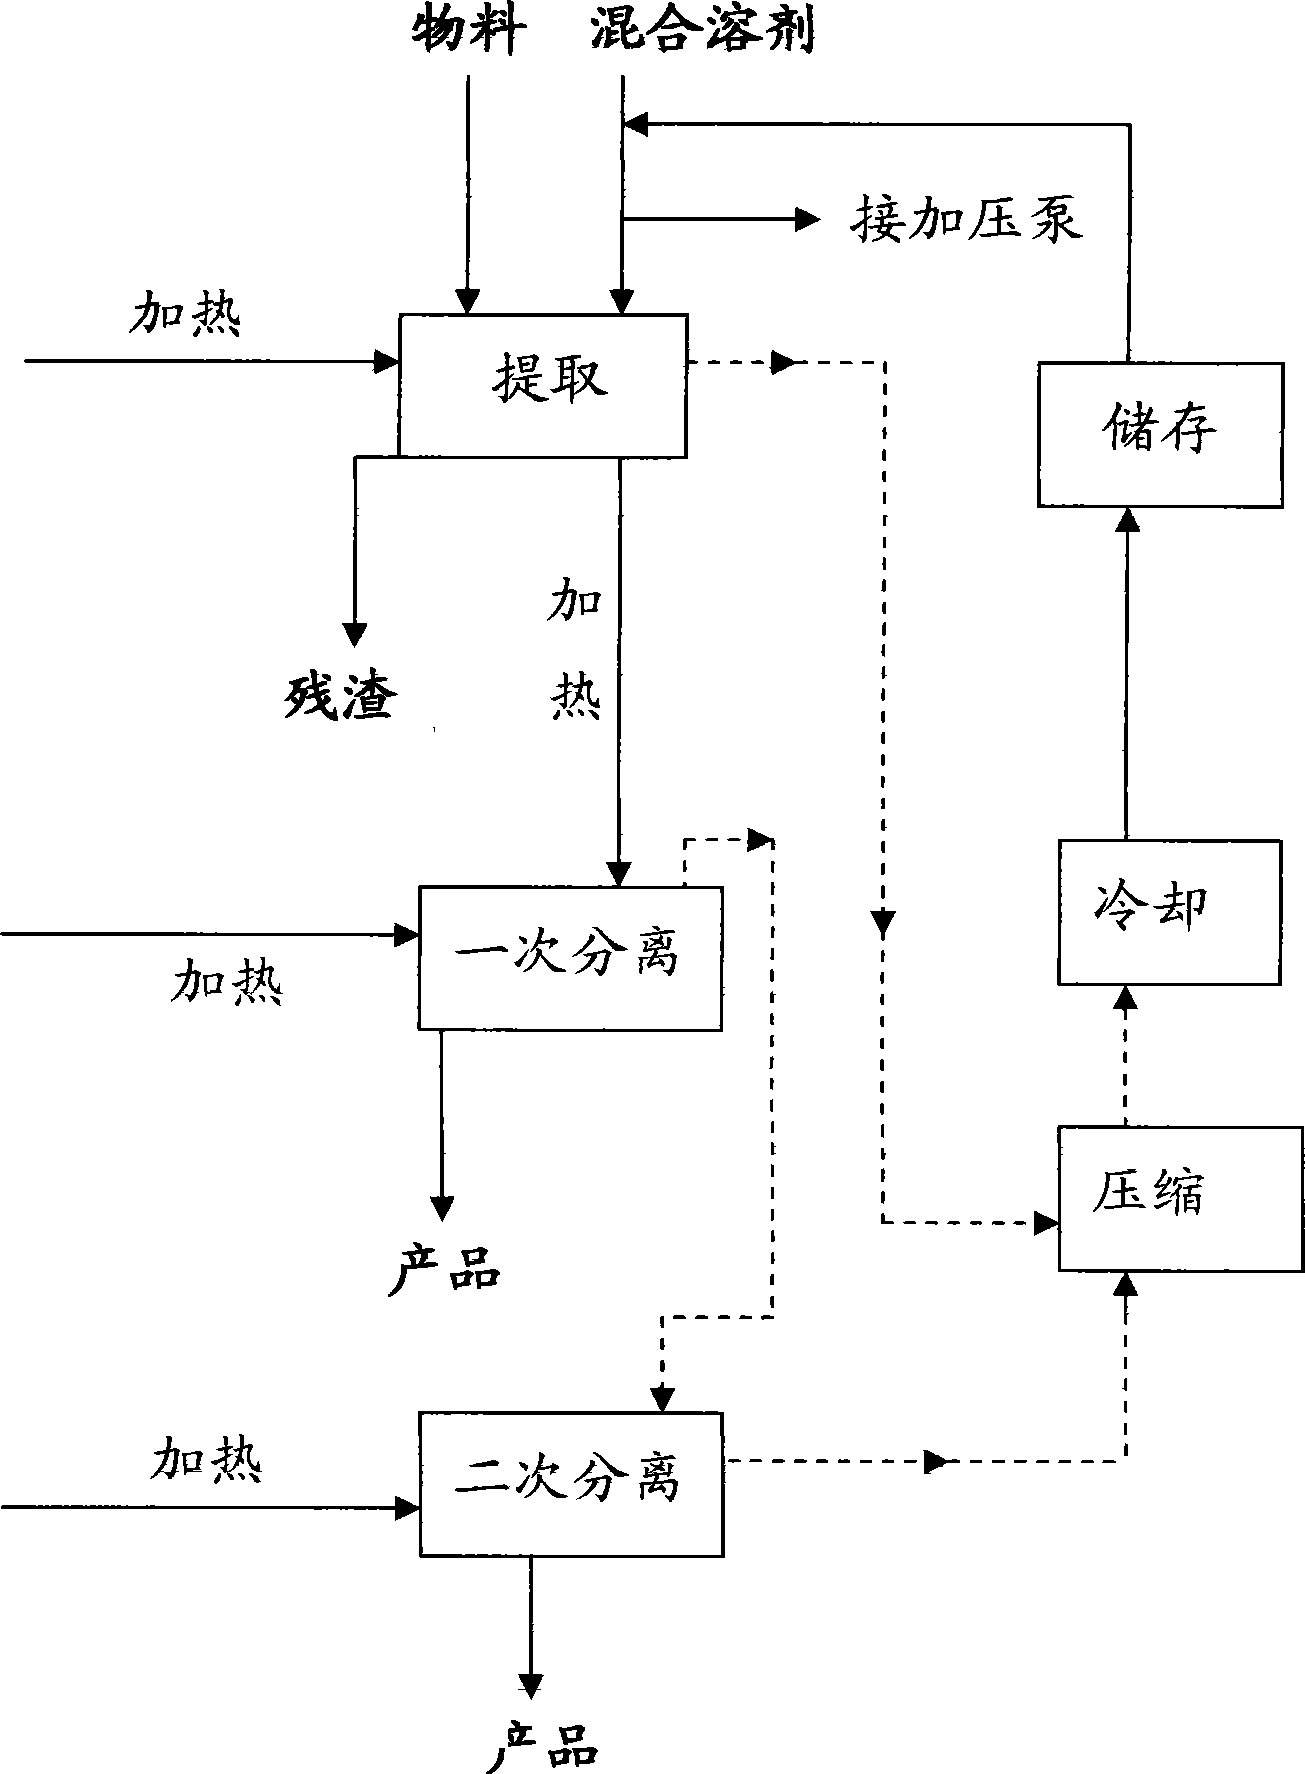 Mixed solvent low-pressure fluid critical extract method